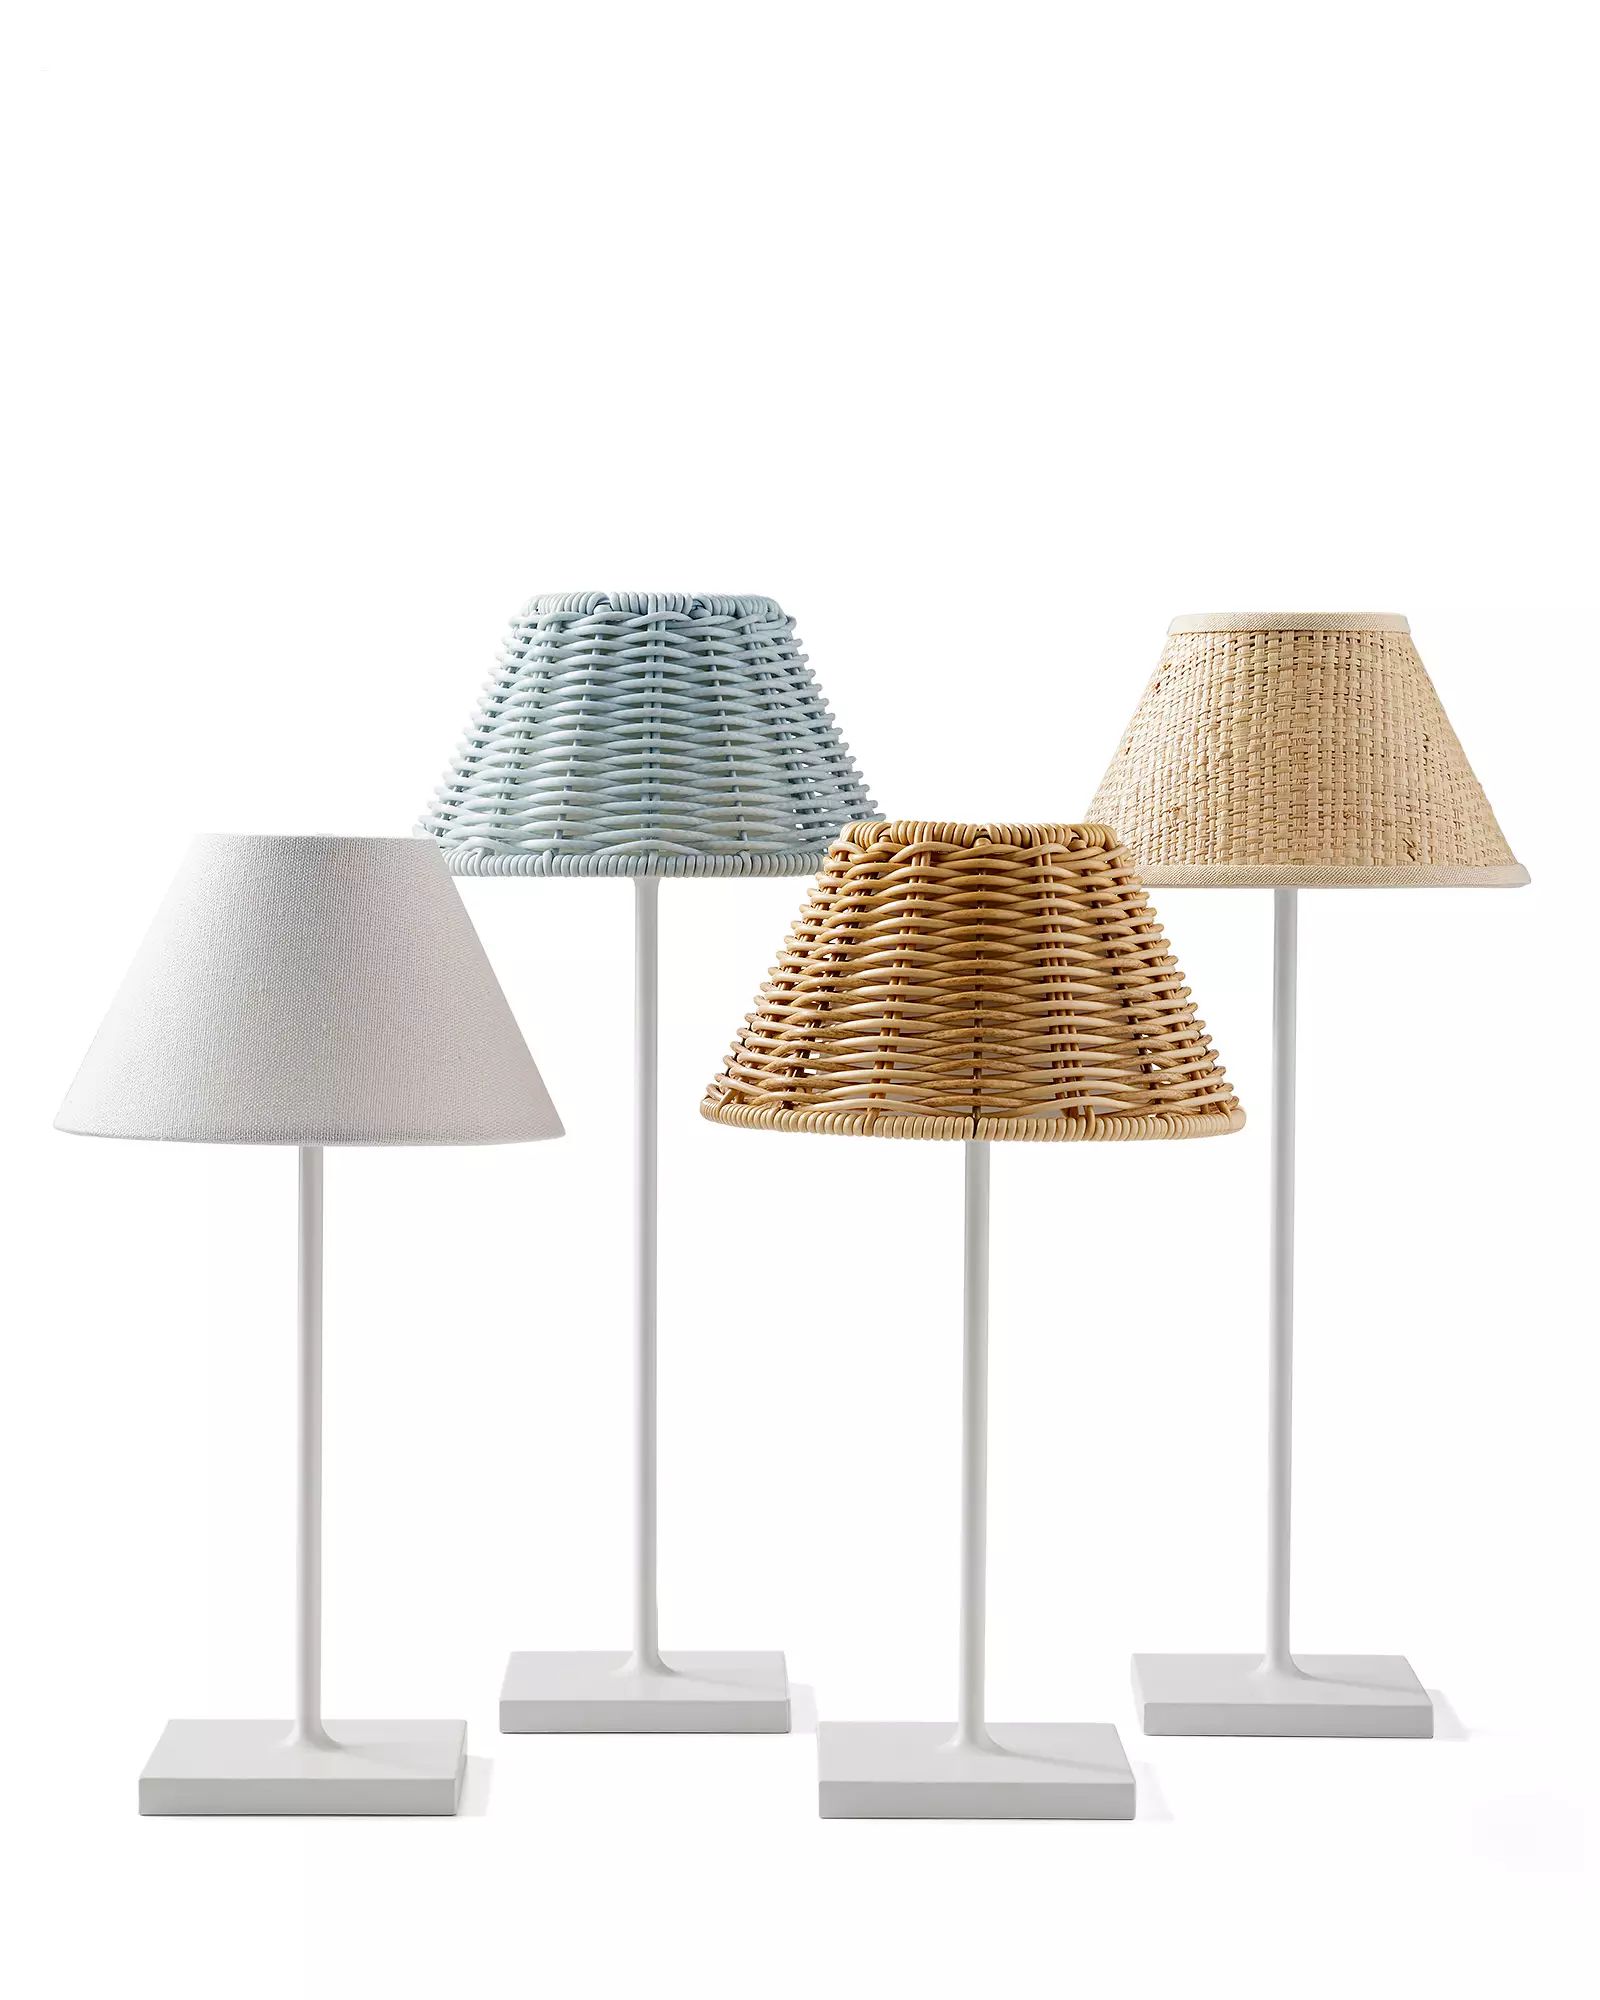 Rechargeable Table Lamp Shade Cover | Serena and Lily